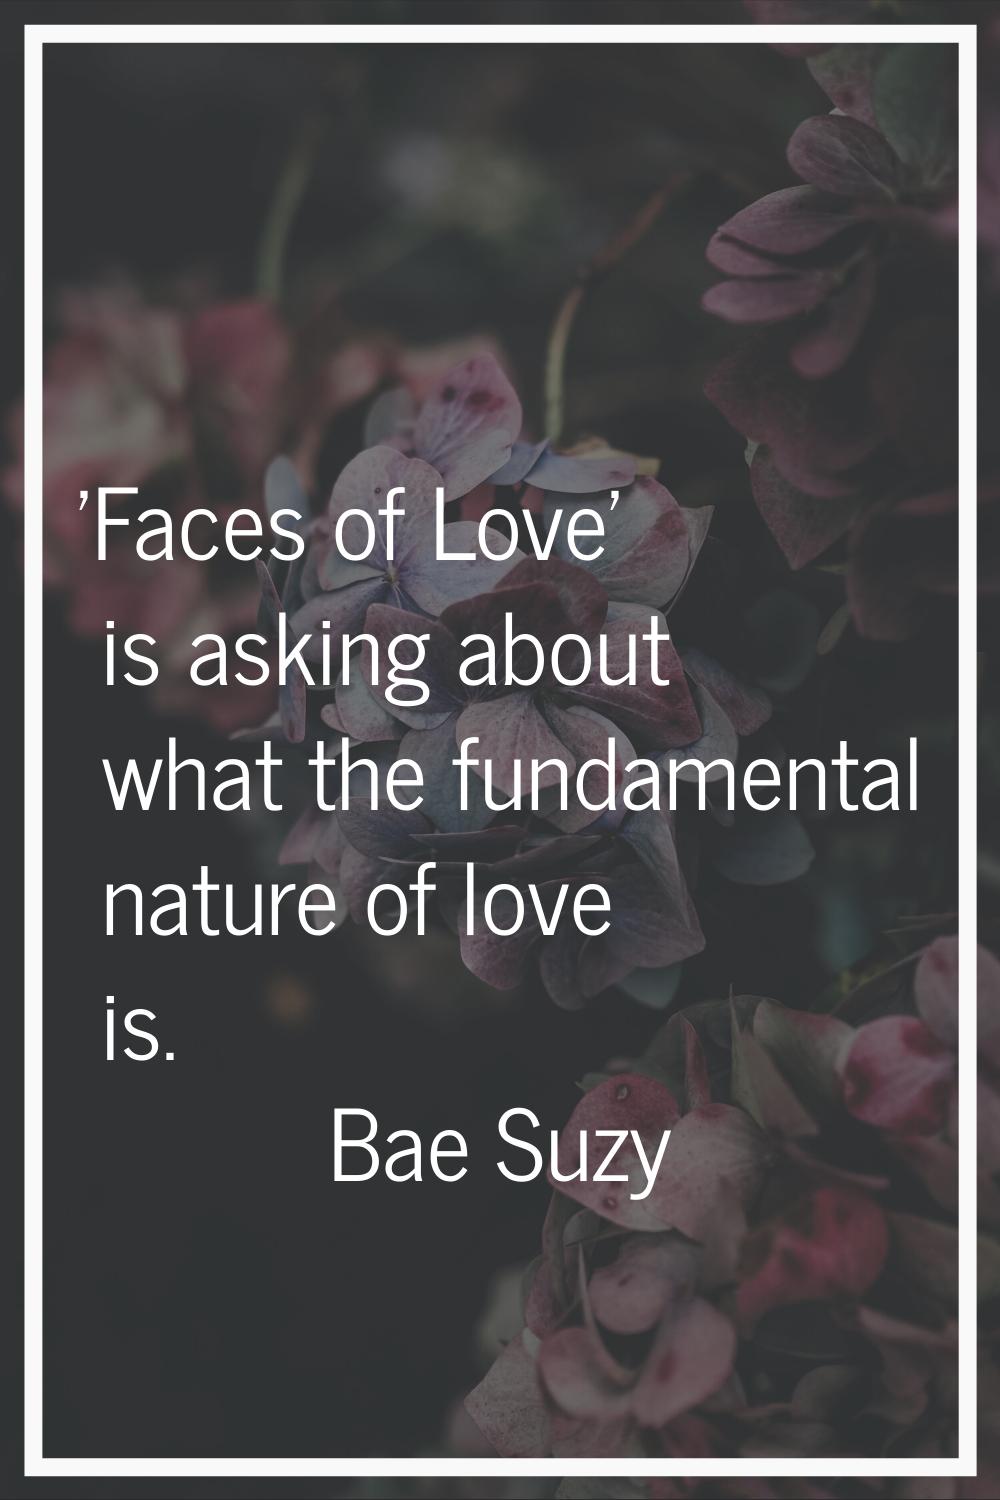 'Faces of Love' is asking about what the fundamental nature of love is.